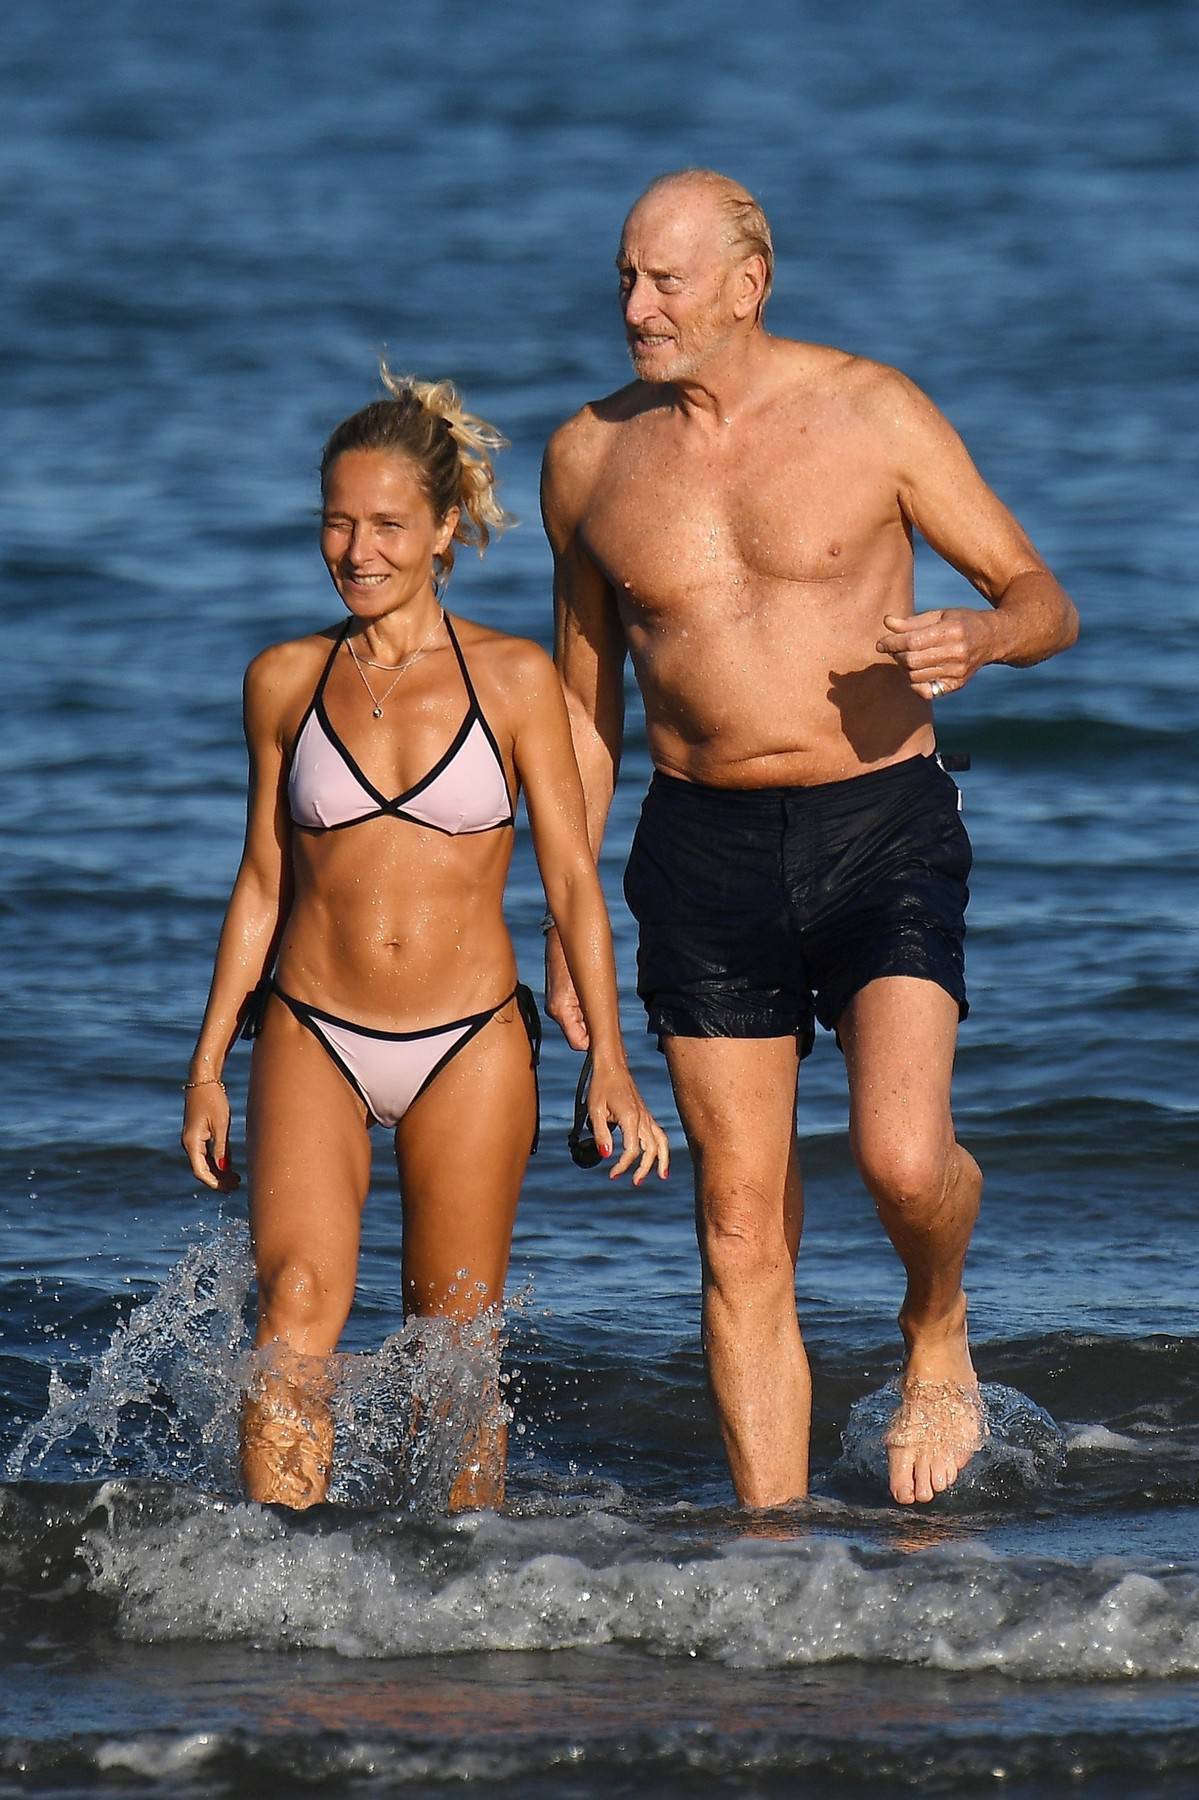 73 year old actor Charles Dance OBE looks in incredible shape as he is seen with his girlfriend at the beach in Venice!